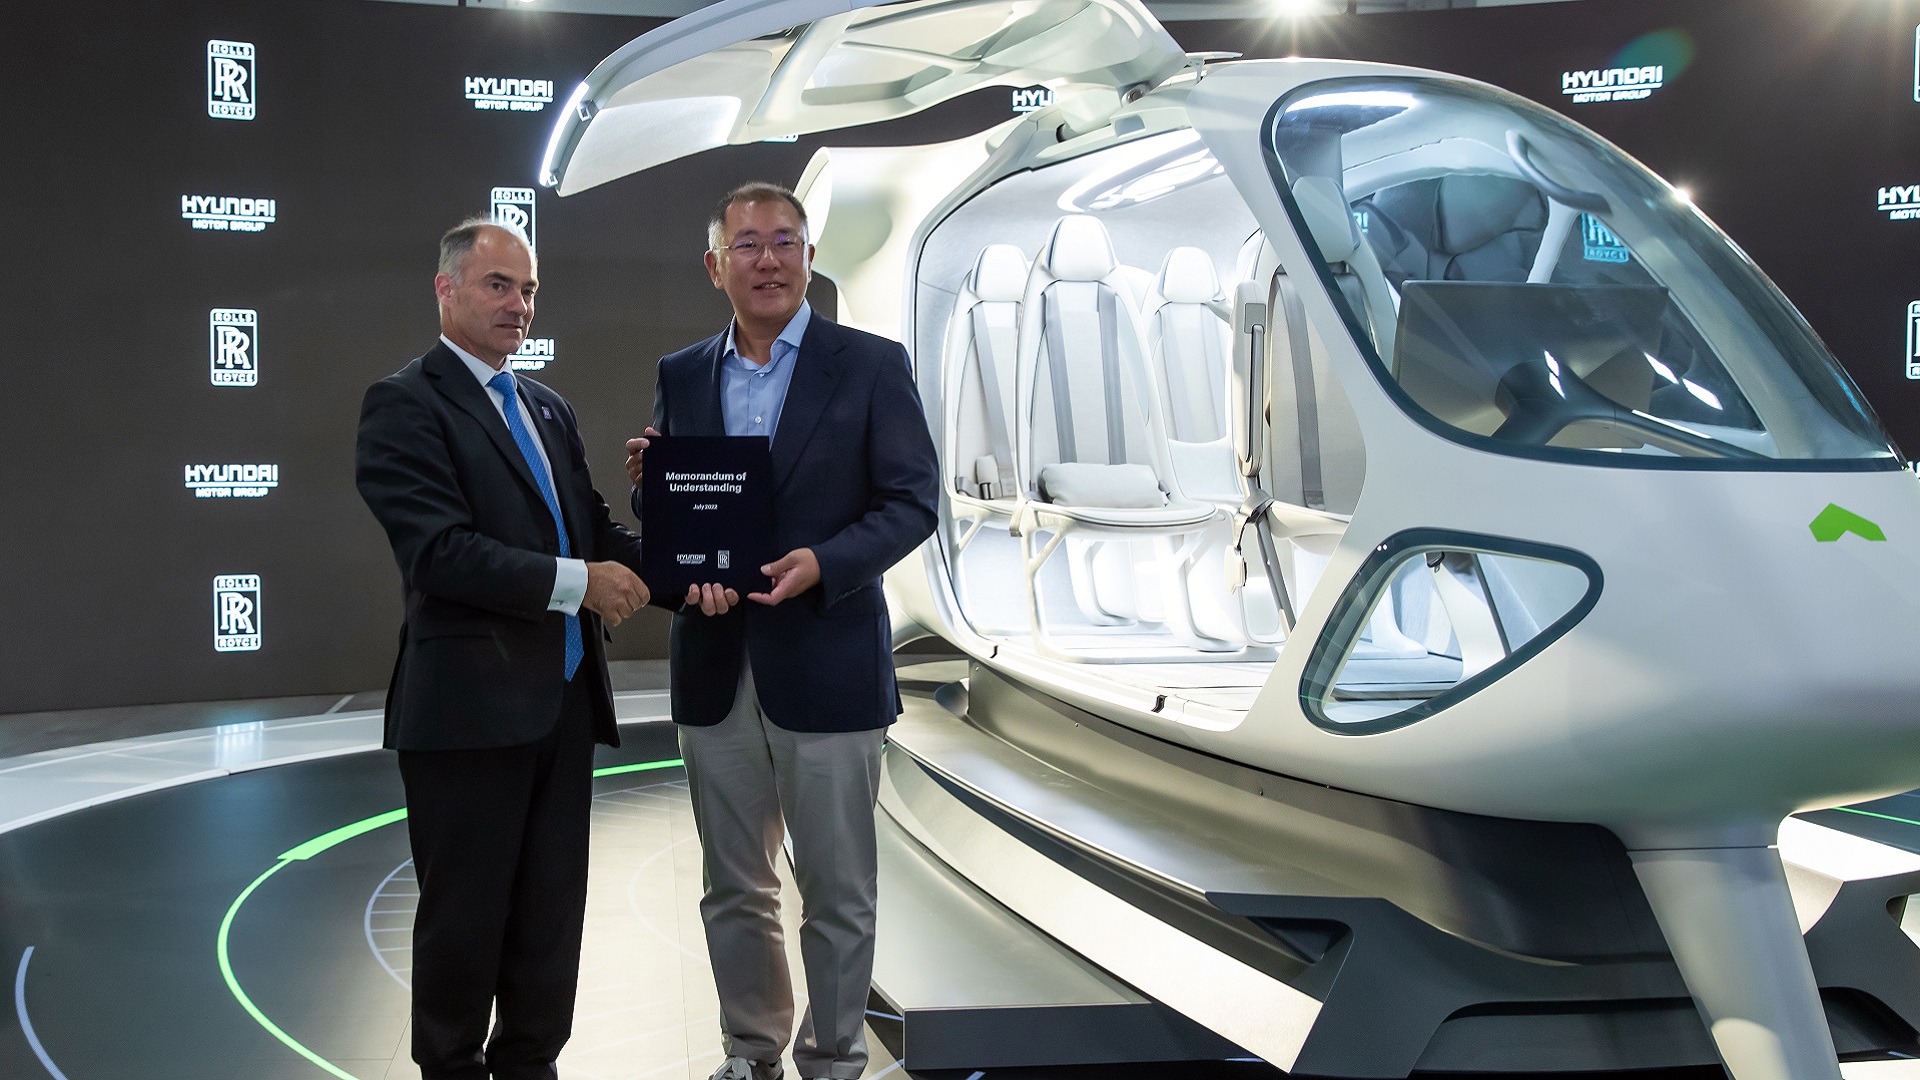 ROLLS-ROYCE & HYUNDAI MOTOR GROUP SIGN MOU TO LEAD THE WAY IN  THE ADVANCED AIR MOBILITY MARKET USING ALL-ELECTRIC PROPULSION AND HYDROGEN FUEL CELL TECHNOLOGY